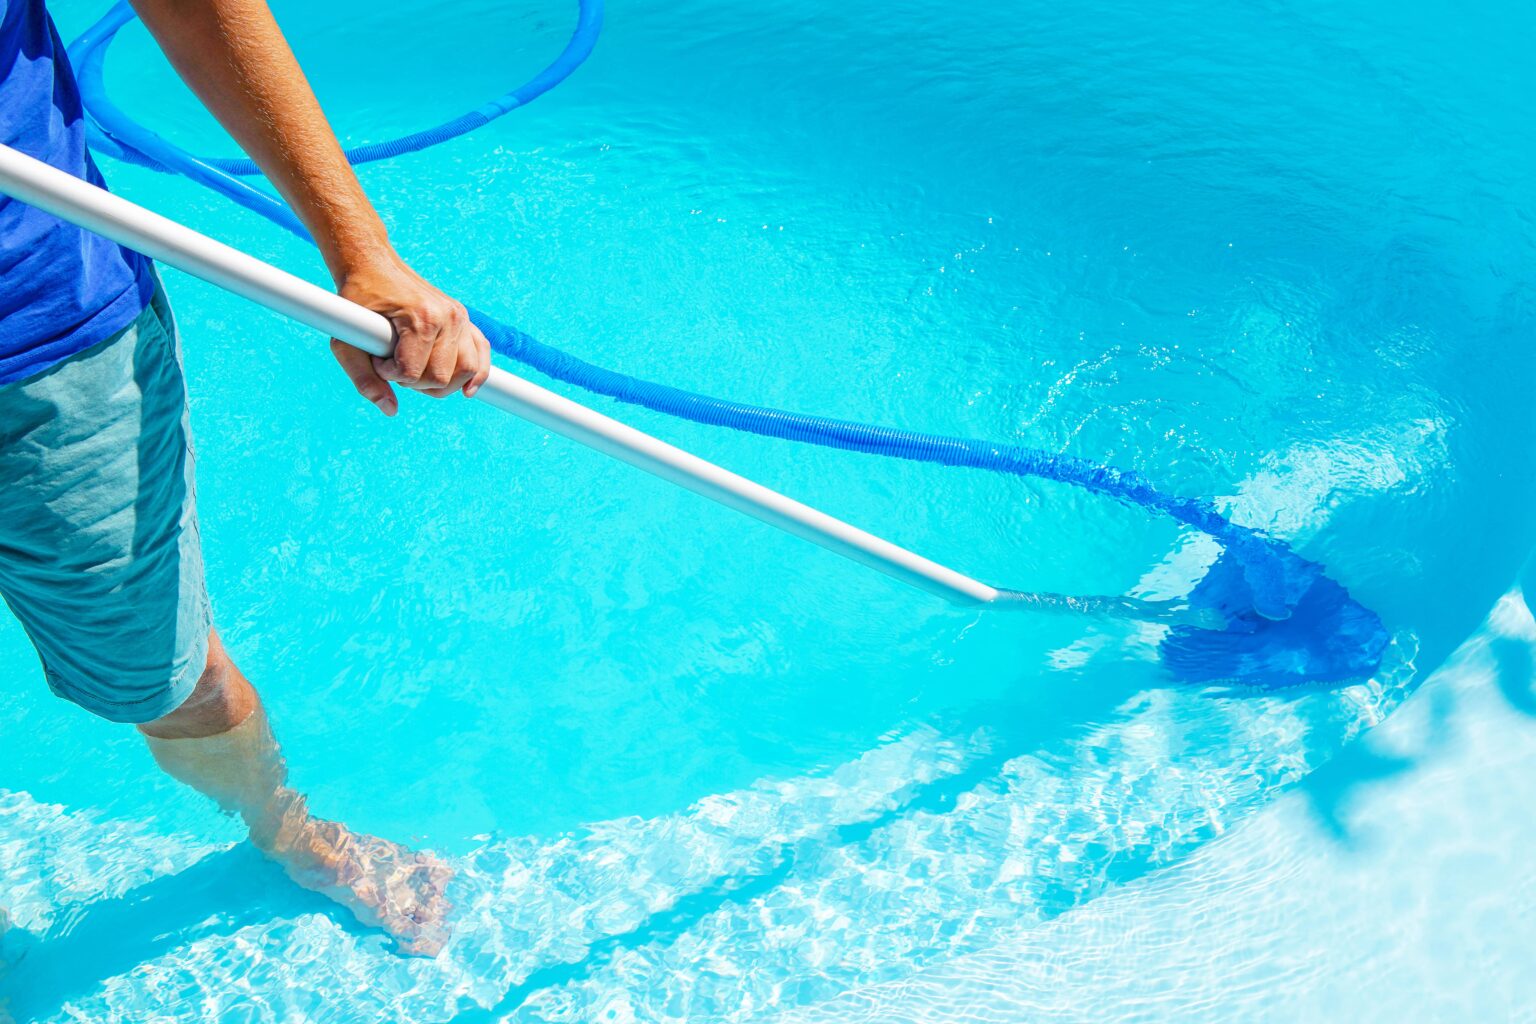 Weekly Pool Service in Sacramento Cost?